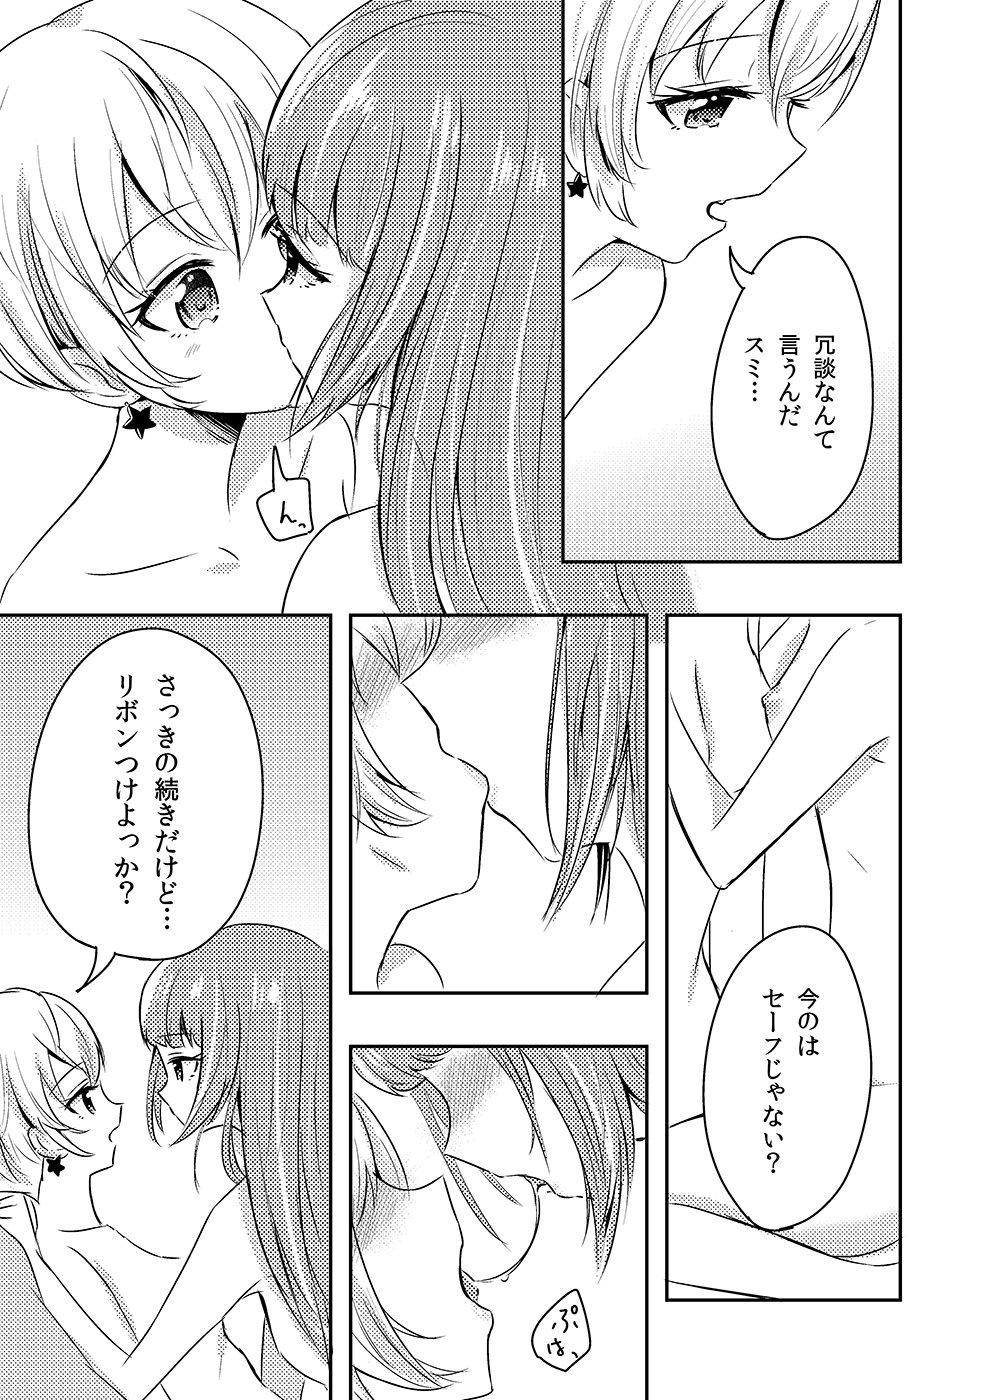 Large Who contributed to loveless sex joint two years ago! Yuusumi manga. - Aikatsu Whores - Page 3